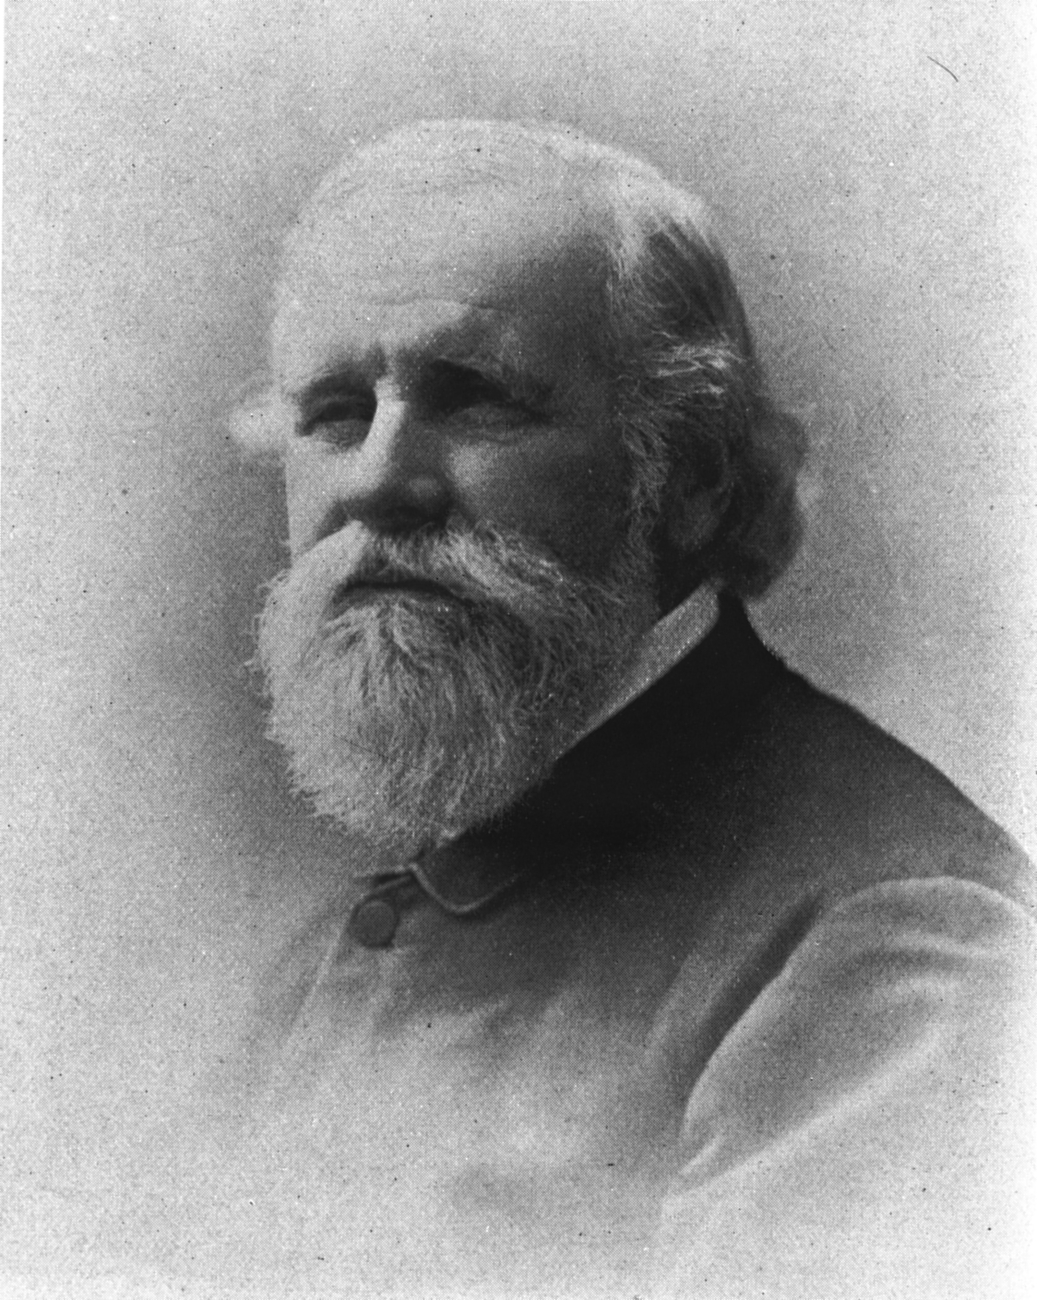 Henry Laurens Whiting